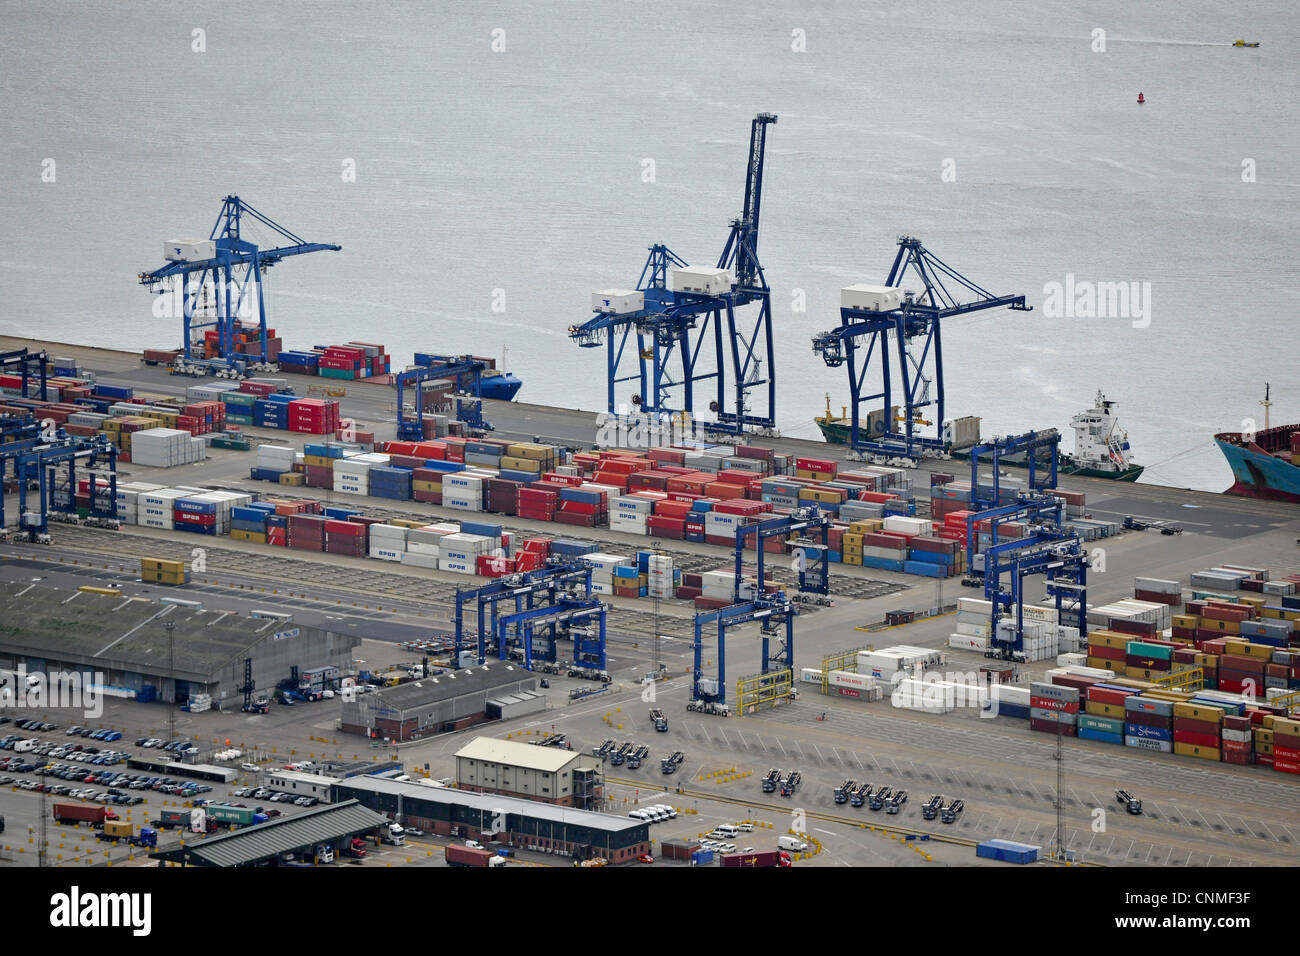 Aerial Photograph of Felixstowe Docks with Shipping containers, cranes, and ships in dock. Stock Photo